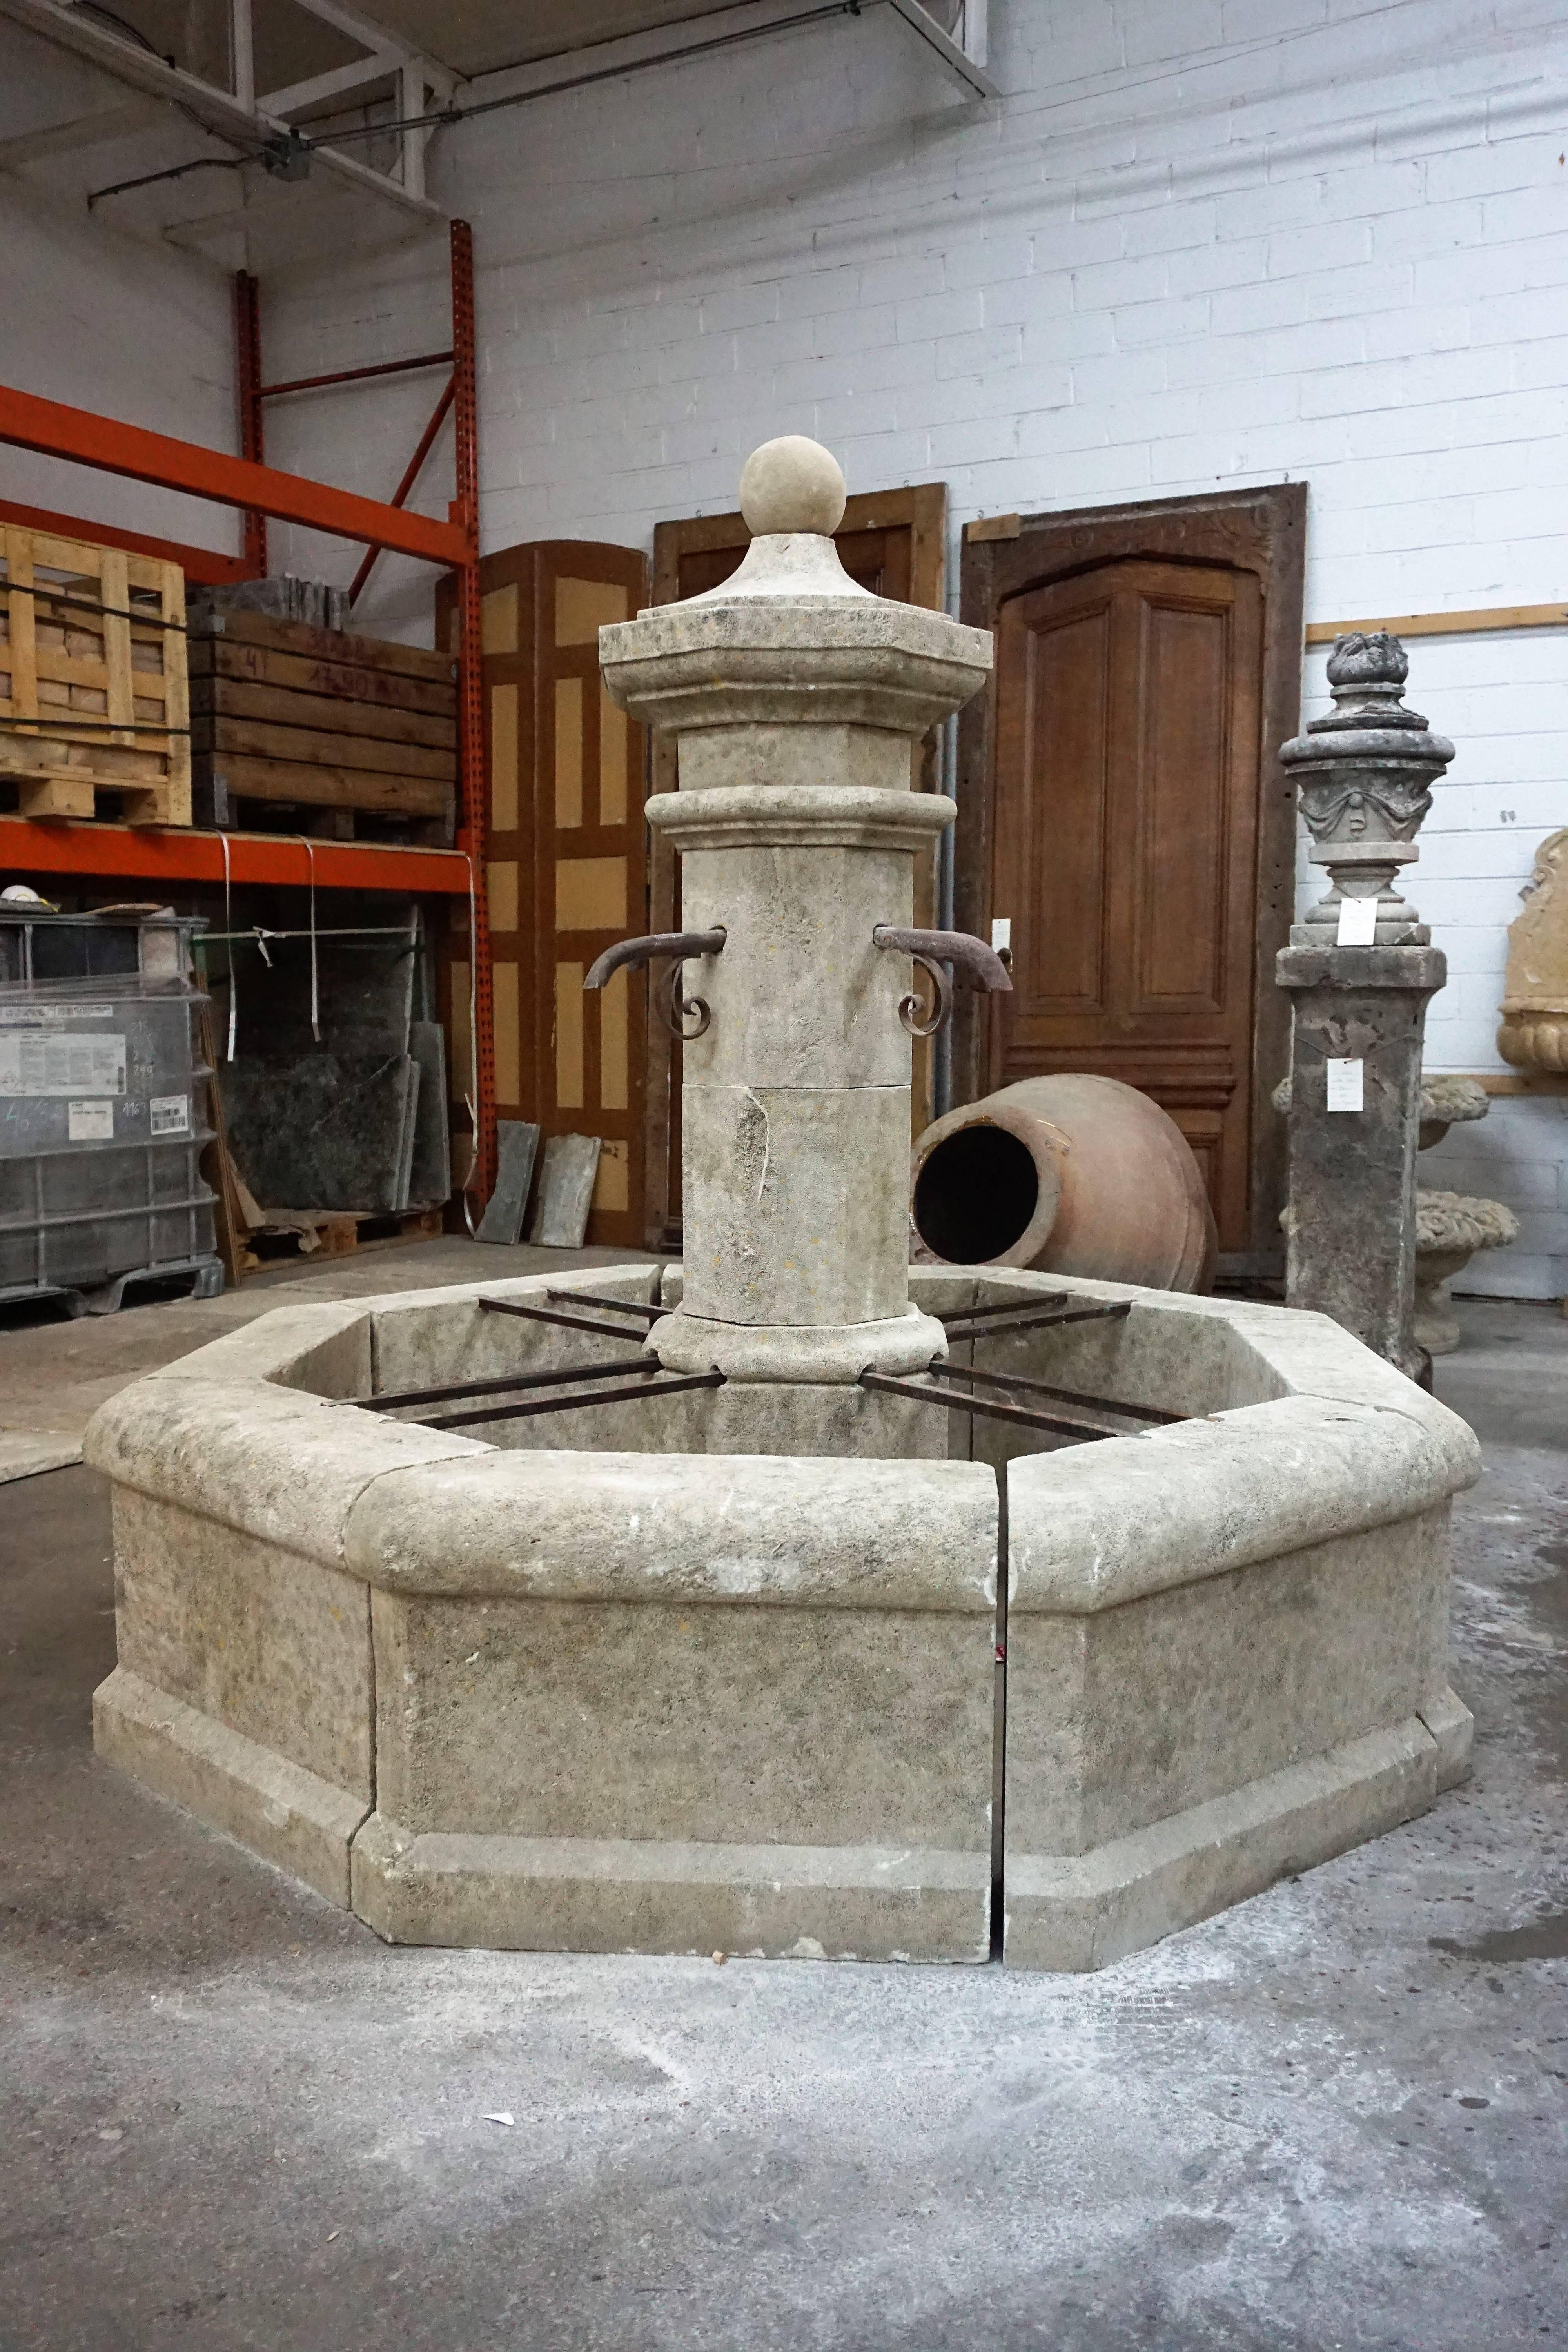 Here we offer a hand-carved limestone central fountain with four iron downspouts. This fountain is a classical French design from an antique village fountain reclaimed outside Montpellier, France. The acoustics from this fountain will fill the air